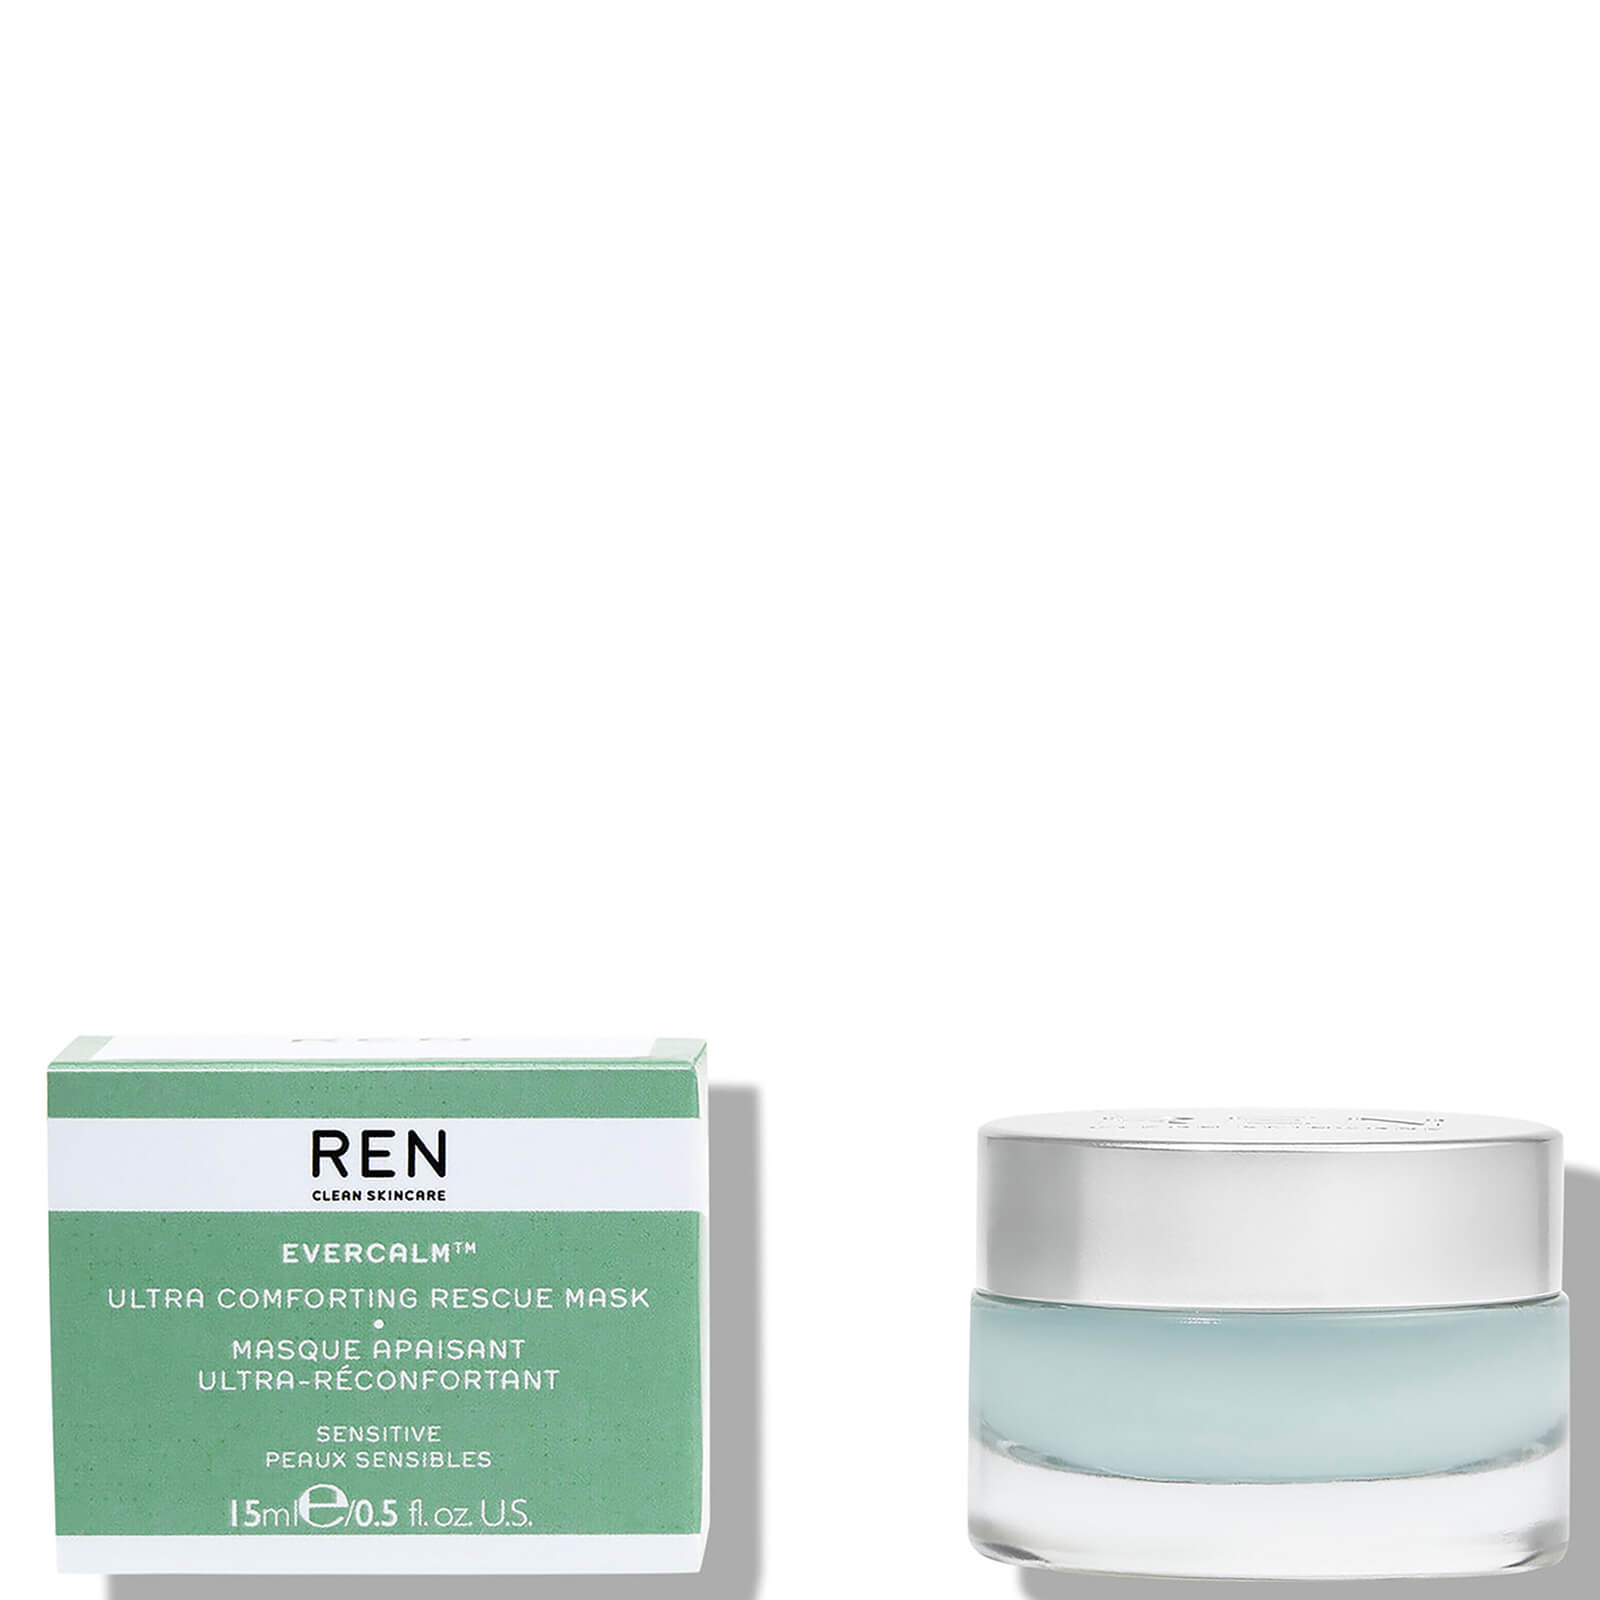 Image of REN Clean Skincare Evercalm Ultra Comforting Rescue Mask 15ml